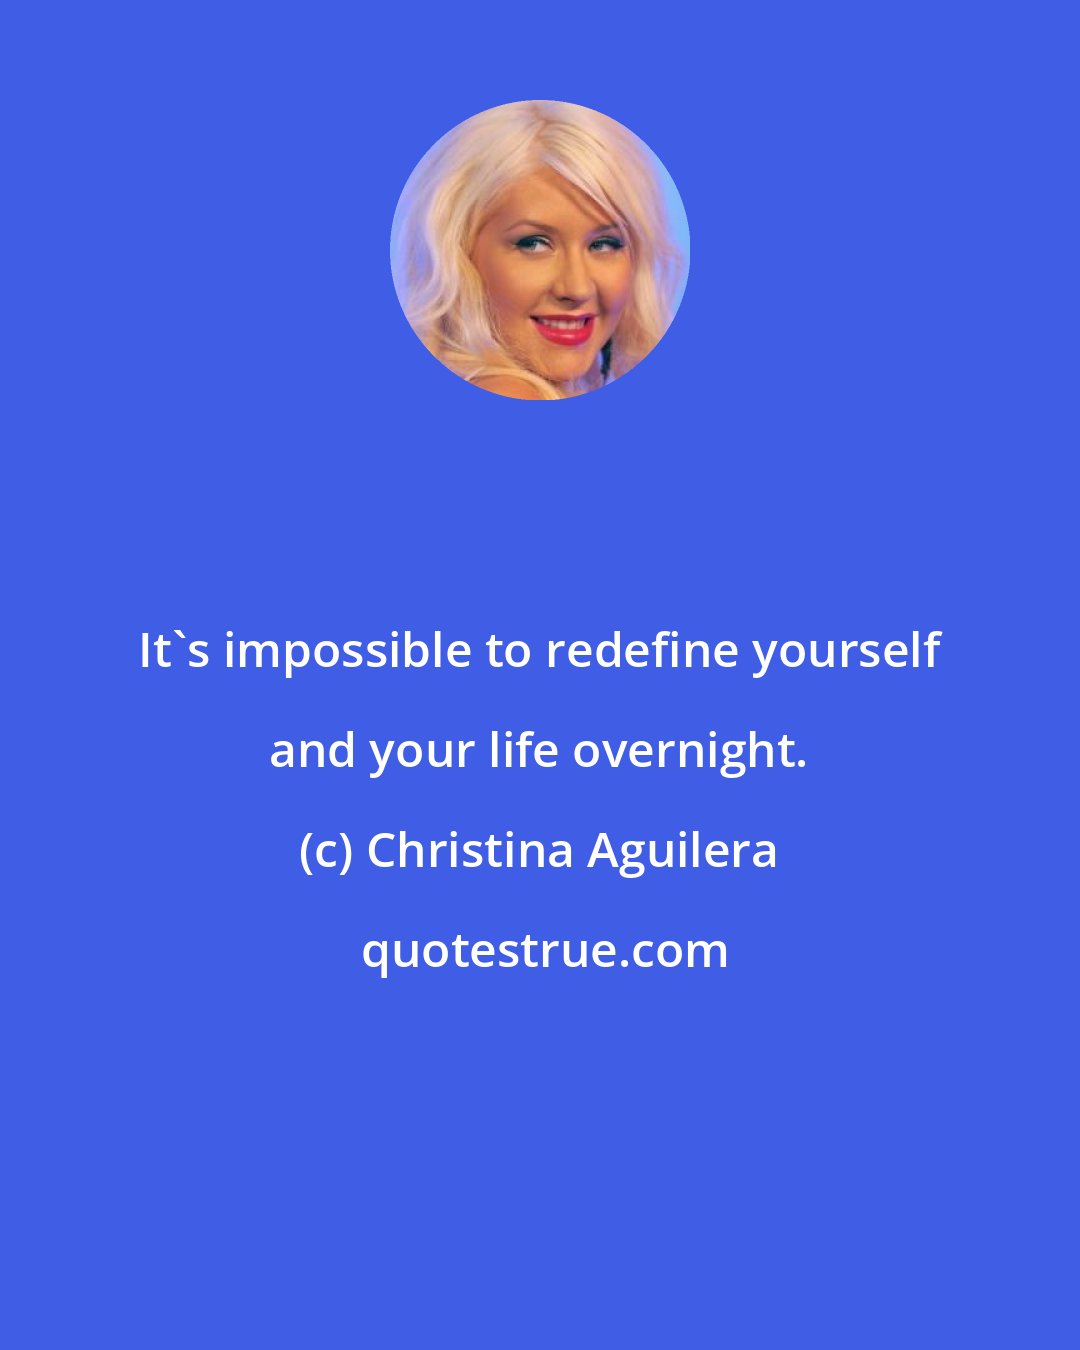 Christina Aguilera: It's impossible to redefine yourself and your life overnight.